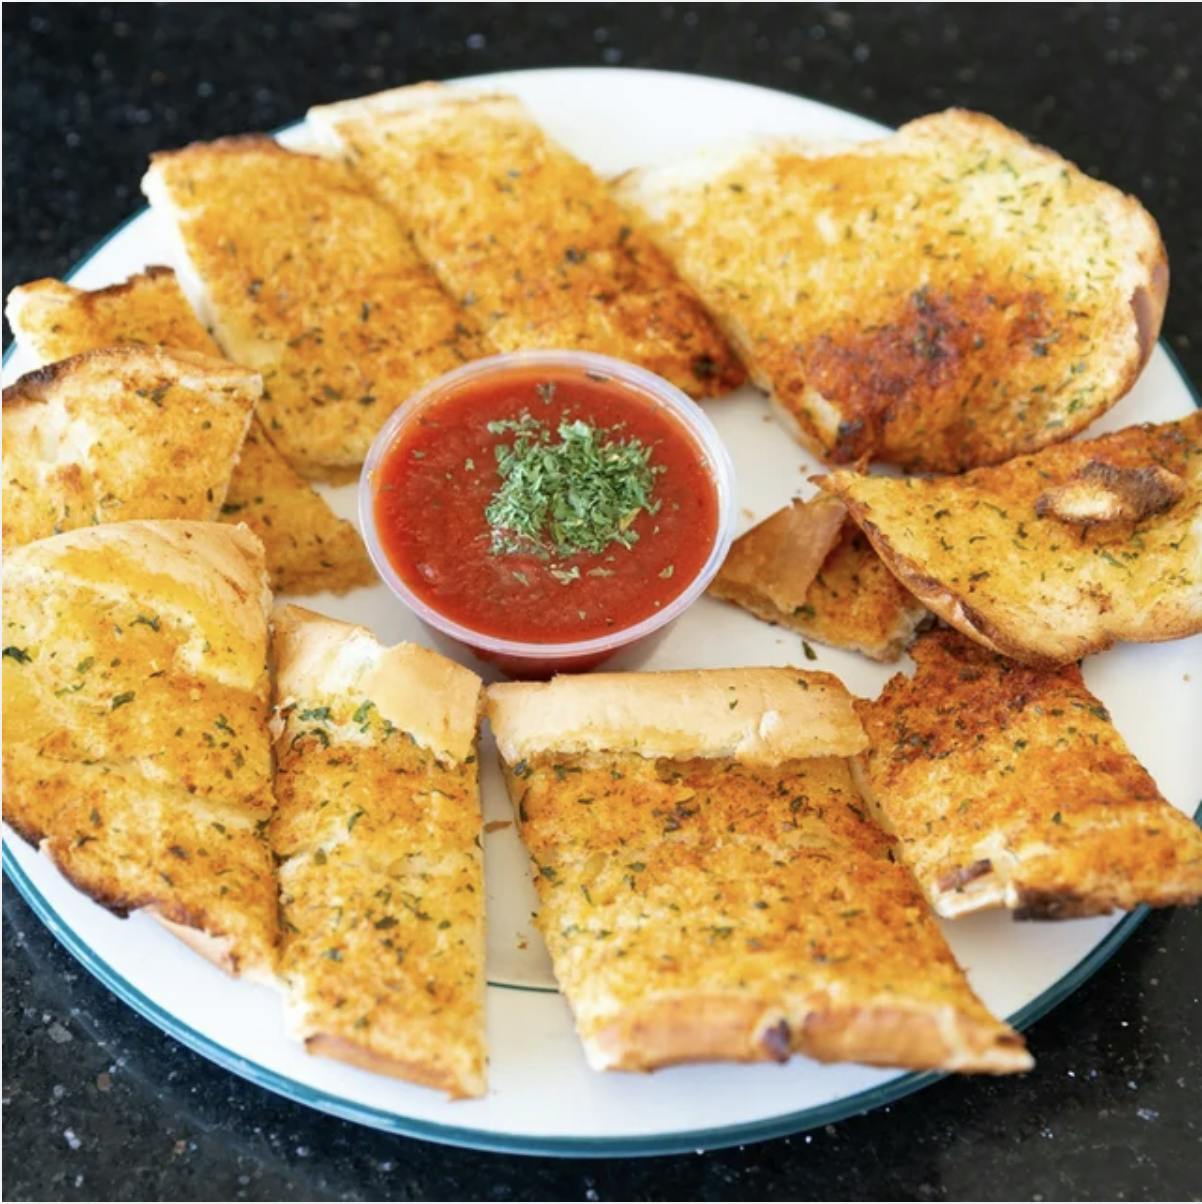 Garlic Bread from Aroma Pizza & Pasta in Lake Forest, CA